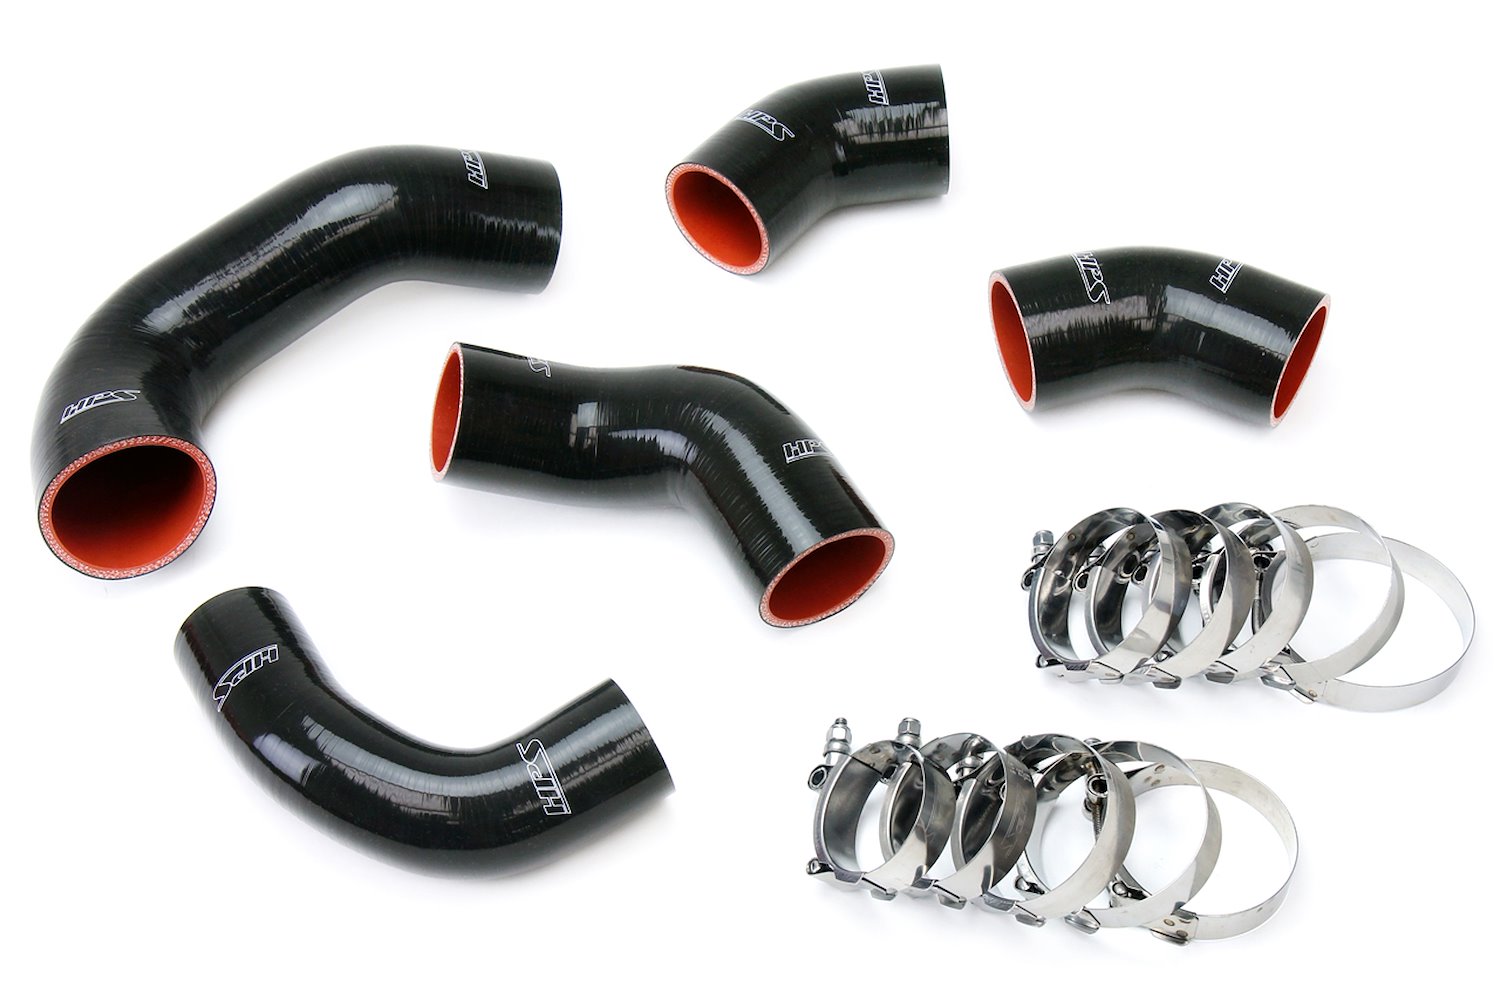 57-1227-BLK Intercooler Hose Kit, High-Temp 4-Ply Reinforced Silicone, Replace OEM Rubber Intercooler Turbo Boots